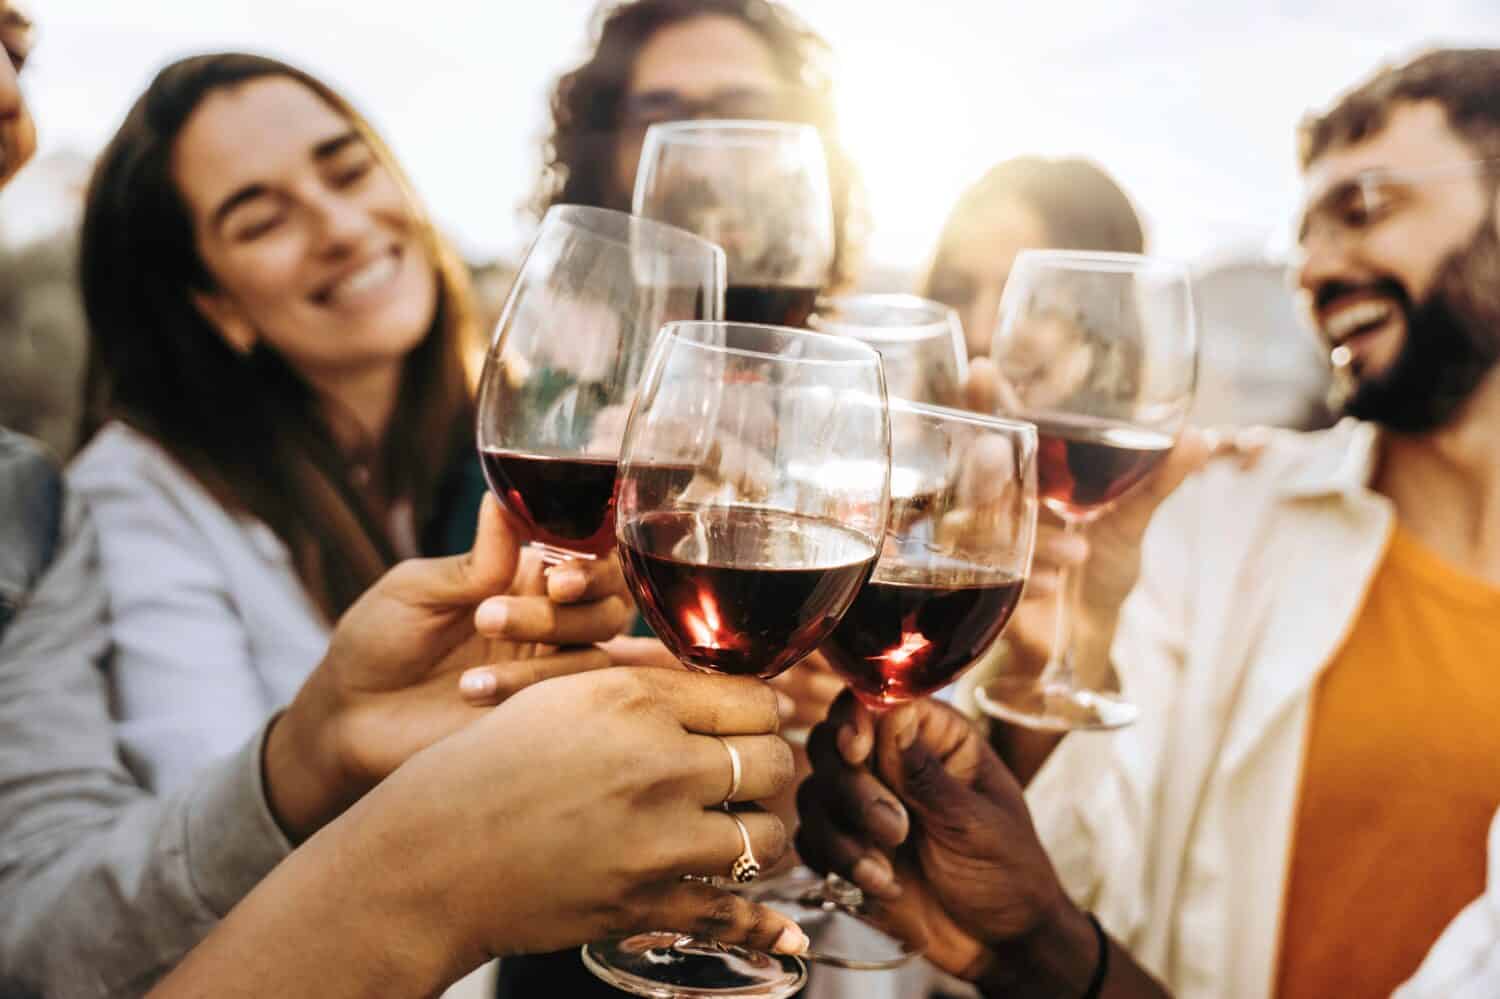 Young people toasting red wine glasses at farm house vineyard countryside - Happy friends enjoying happy hour at winery bar restaurant - Life style concept with guys and girls eating at dinner party